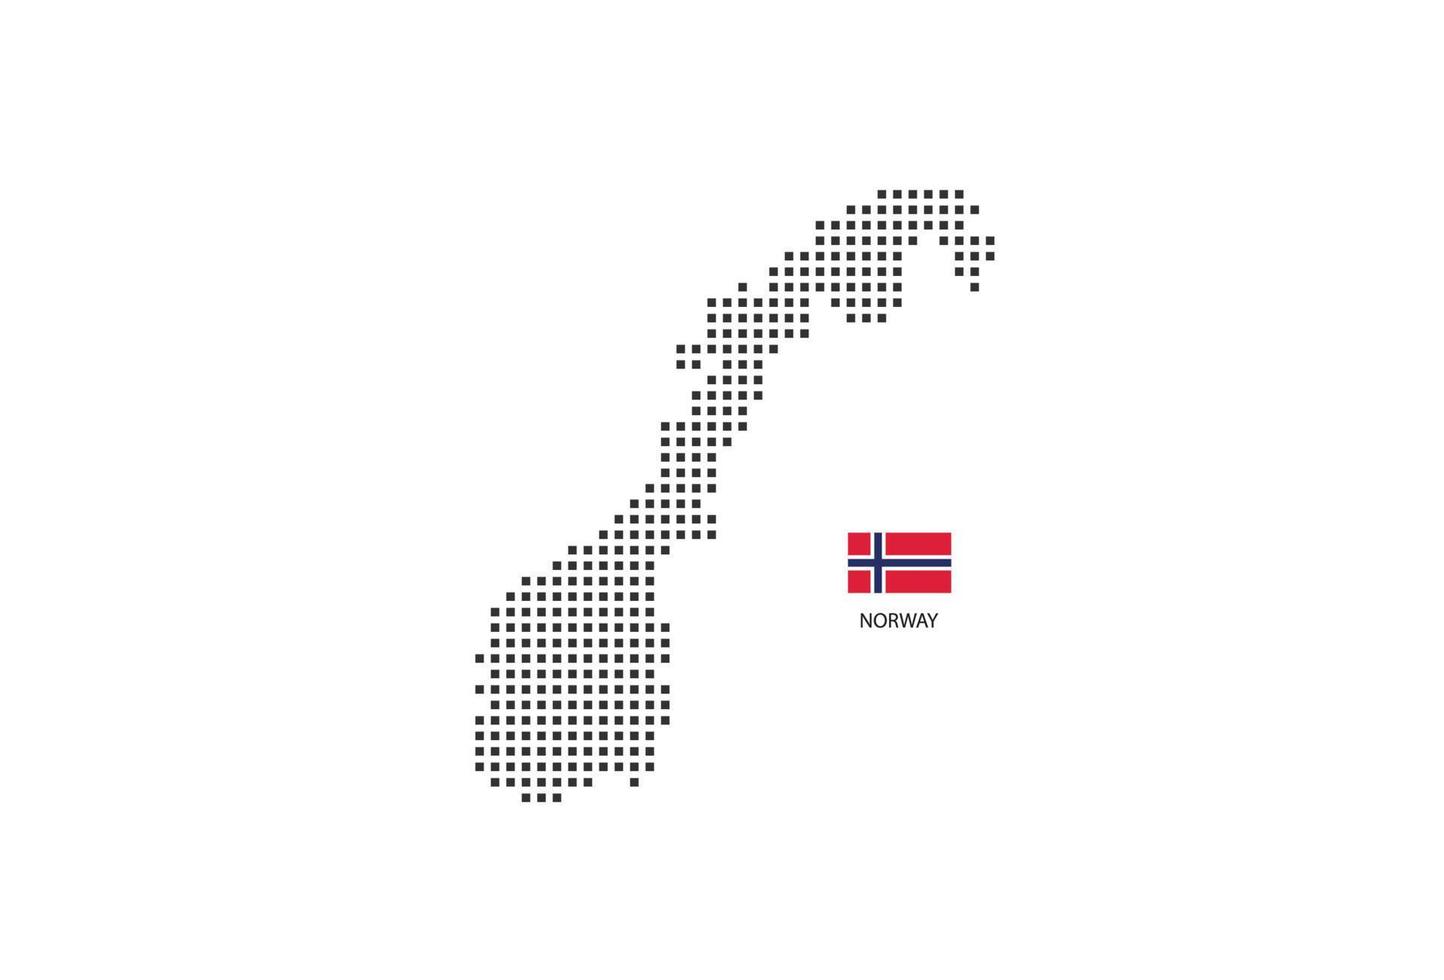 Vector square pixel dotted map of Norway isolated on white background with Norway flag.